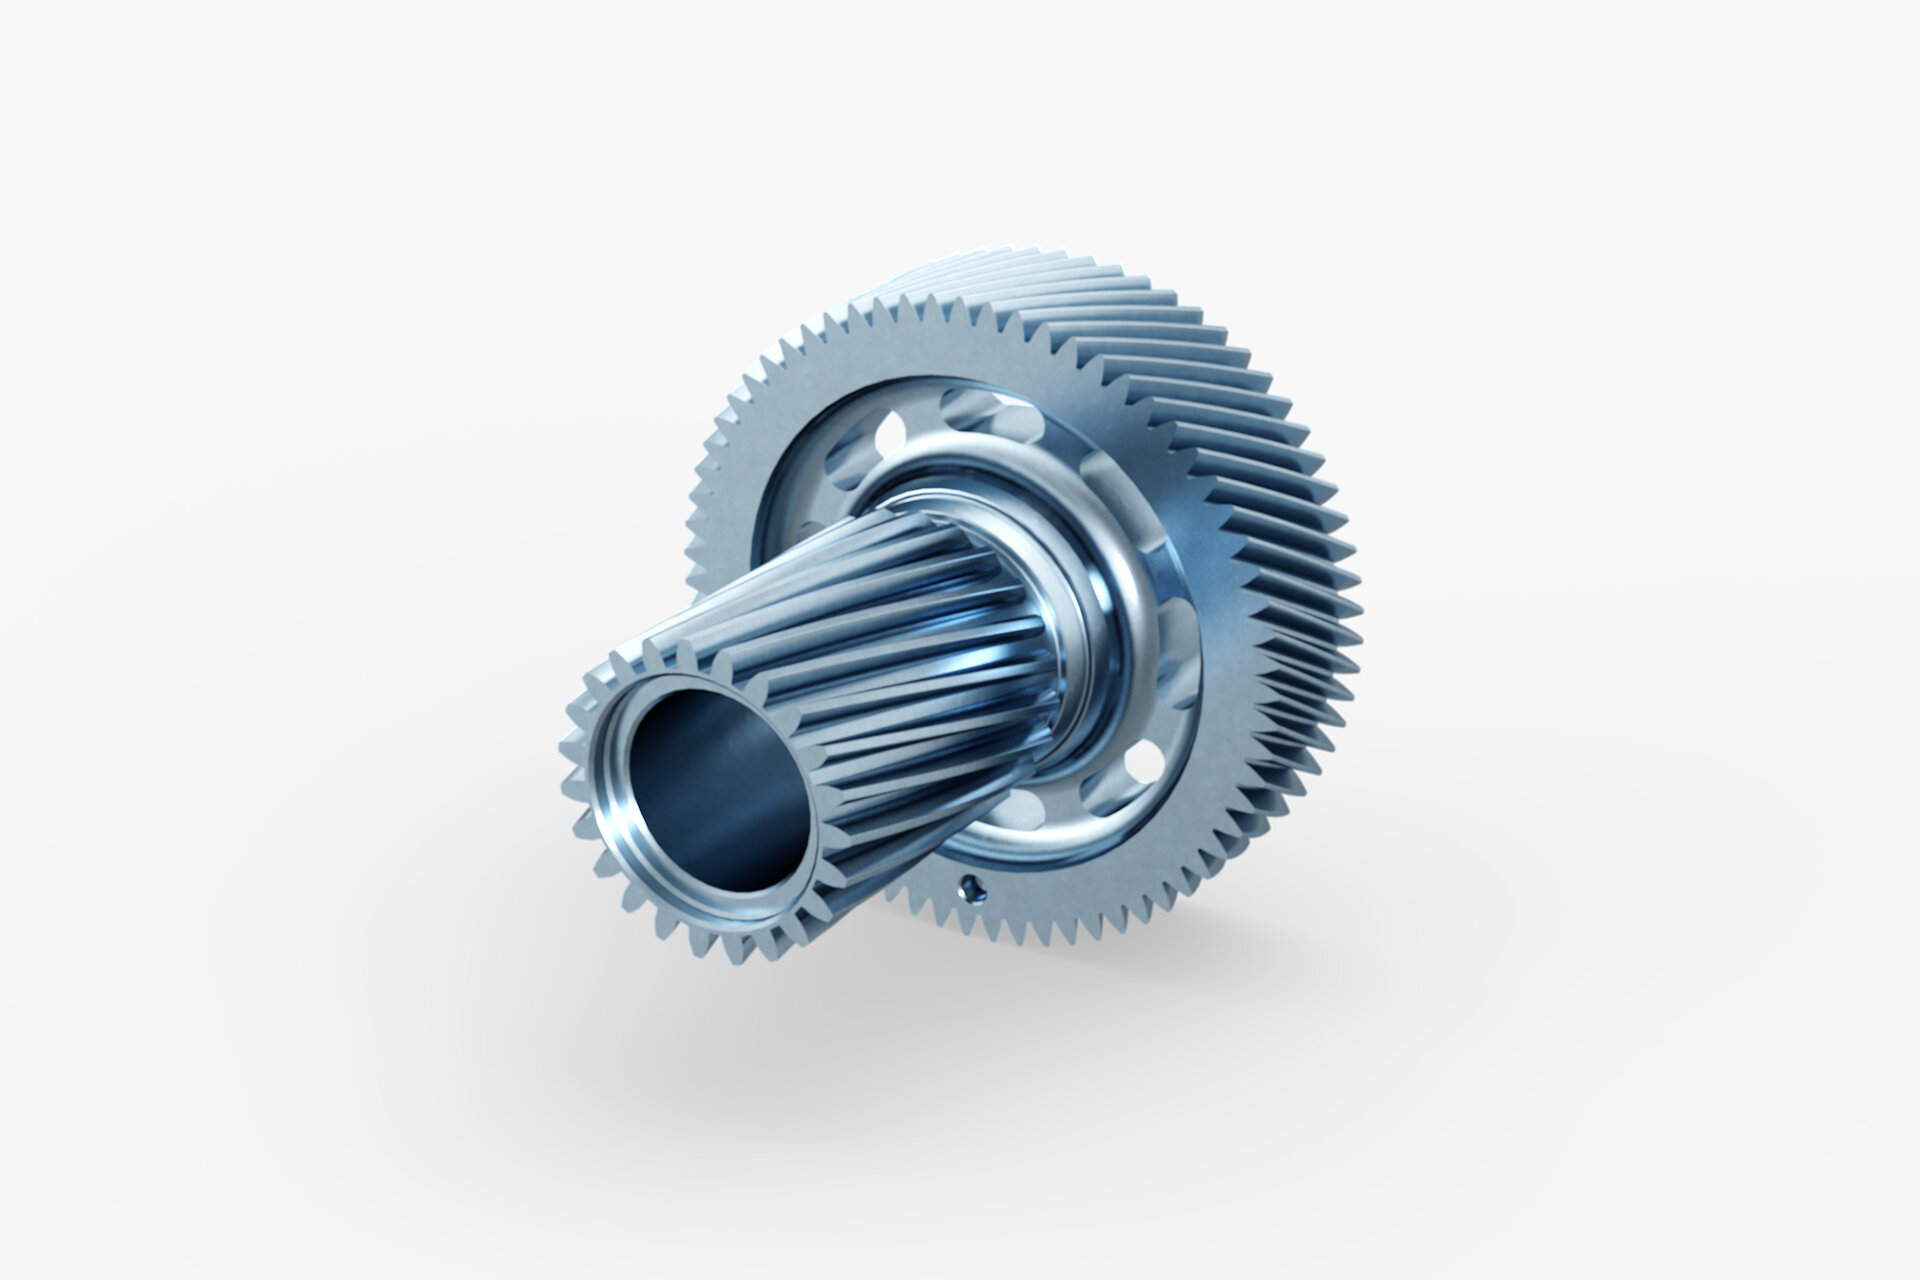 Stepped planetary gear